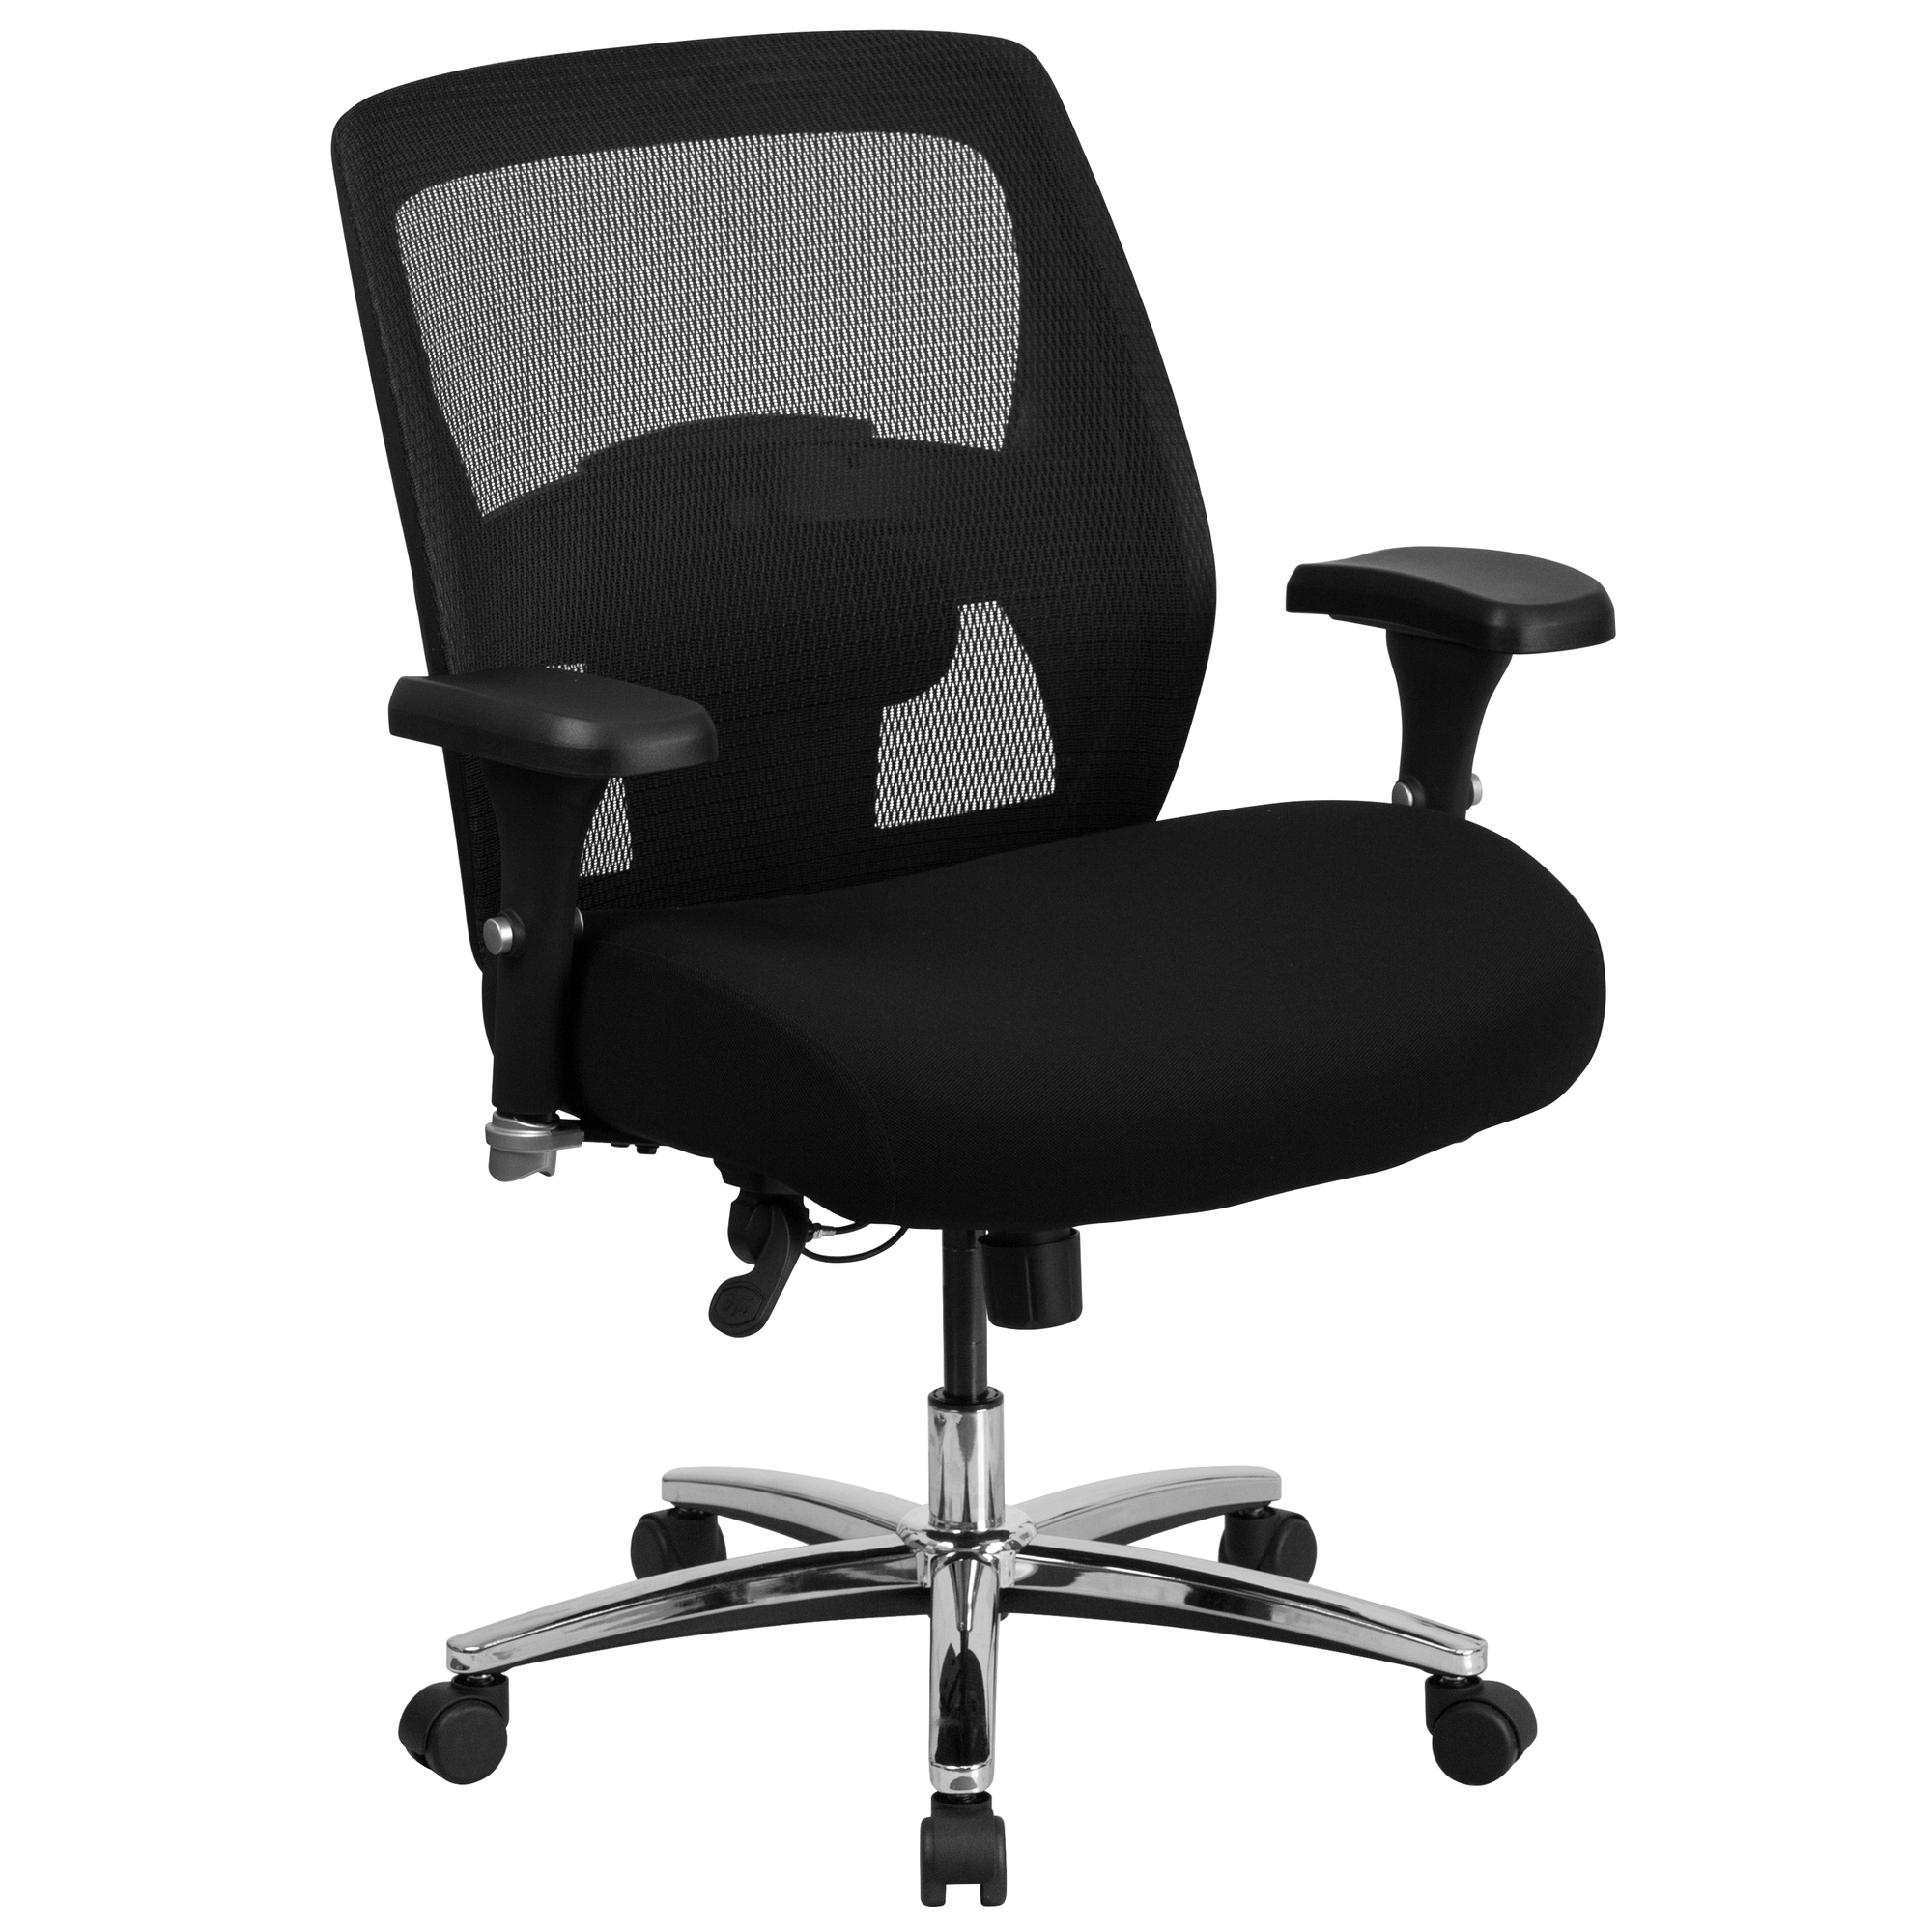 Big Tall 500 lb. Rated Black Mesh Office Chair, Primary Color Black, Included (qty.) 1, Model - Flash Furniture GO993